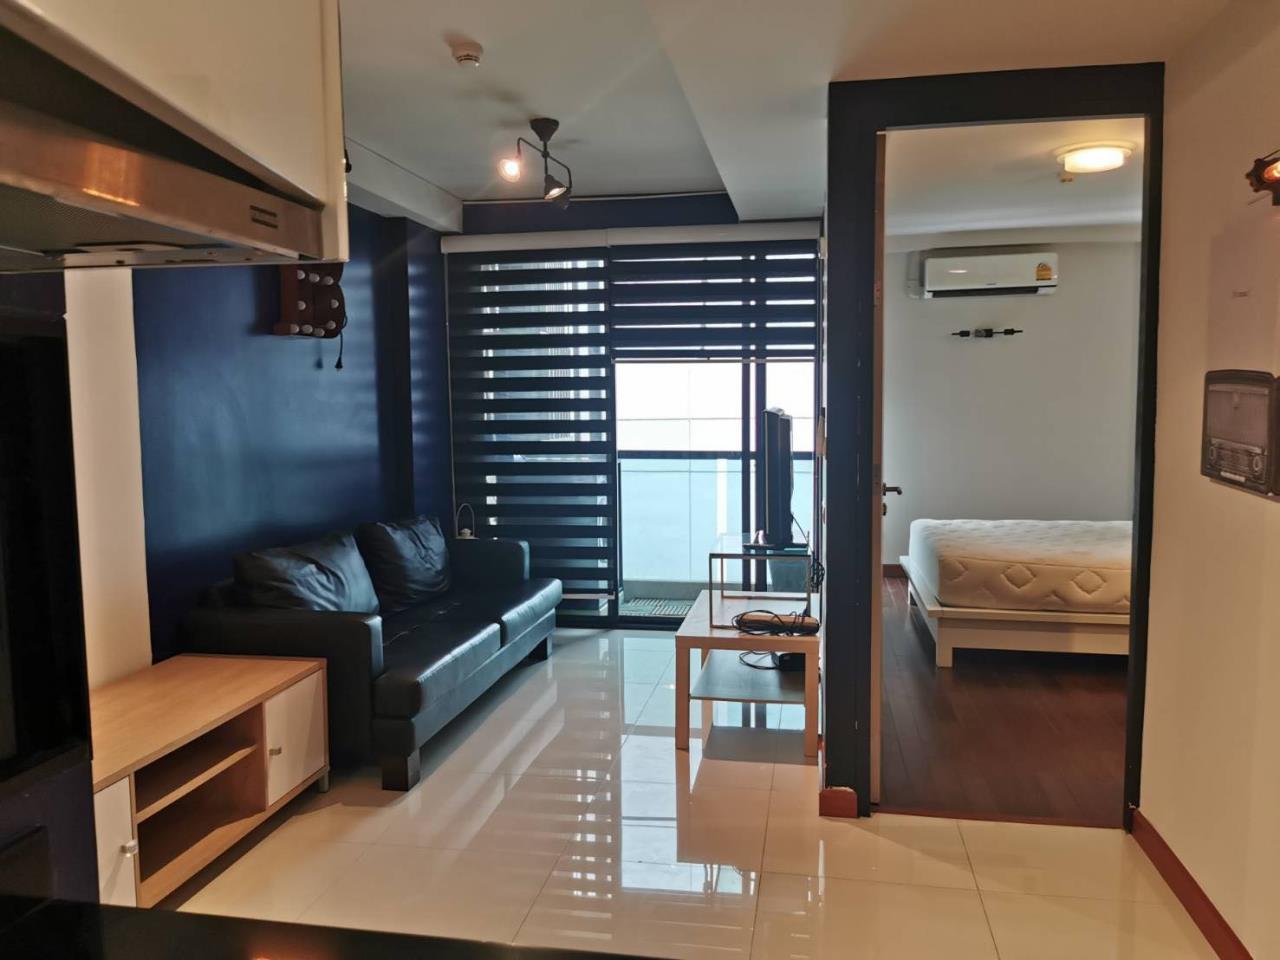 Kwankhao Kathinthong Agency's CONDO FOR SALE - Le Cote Thonglor 8, 1 Bedroom, 5.6 MB. 3